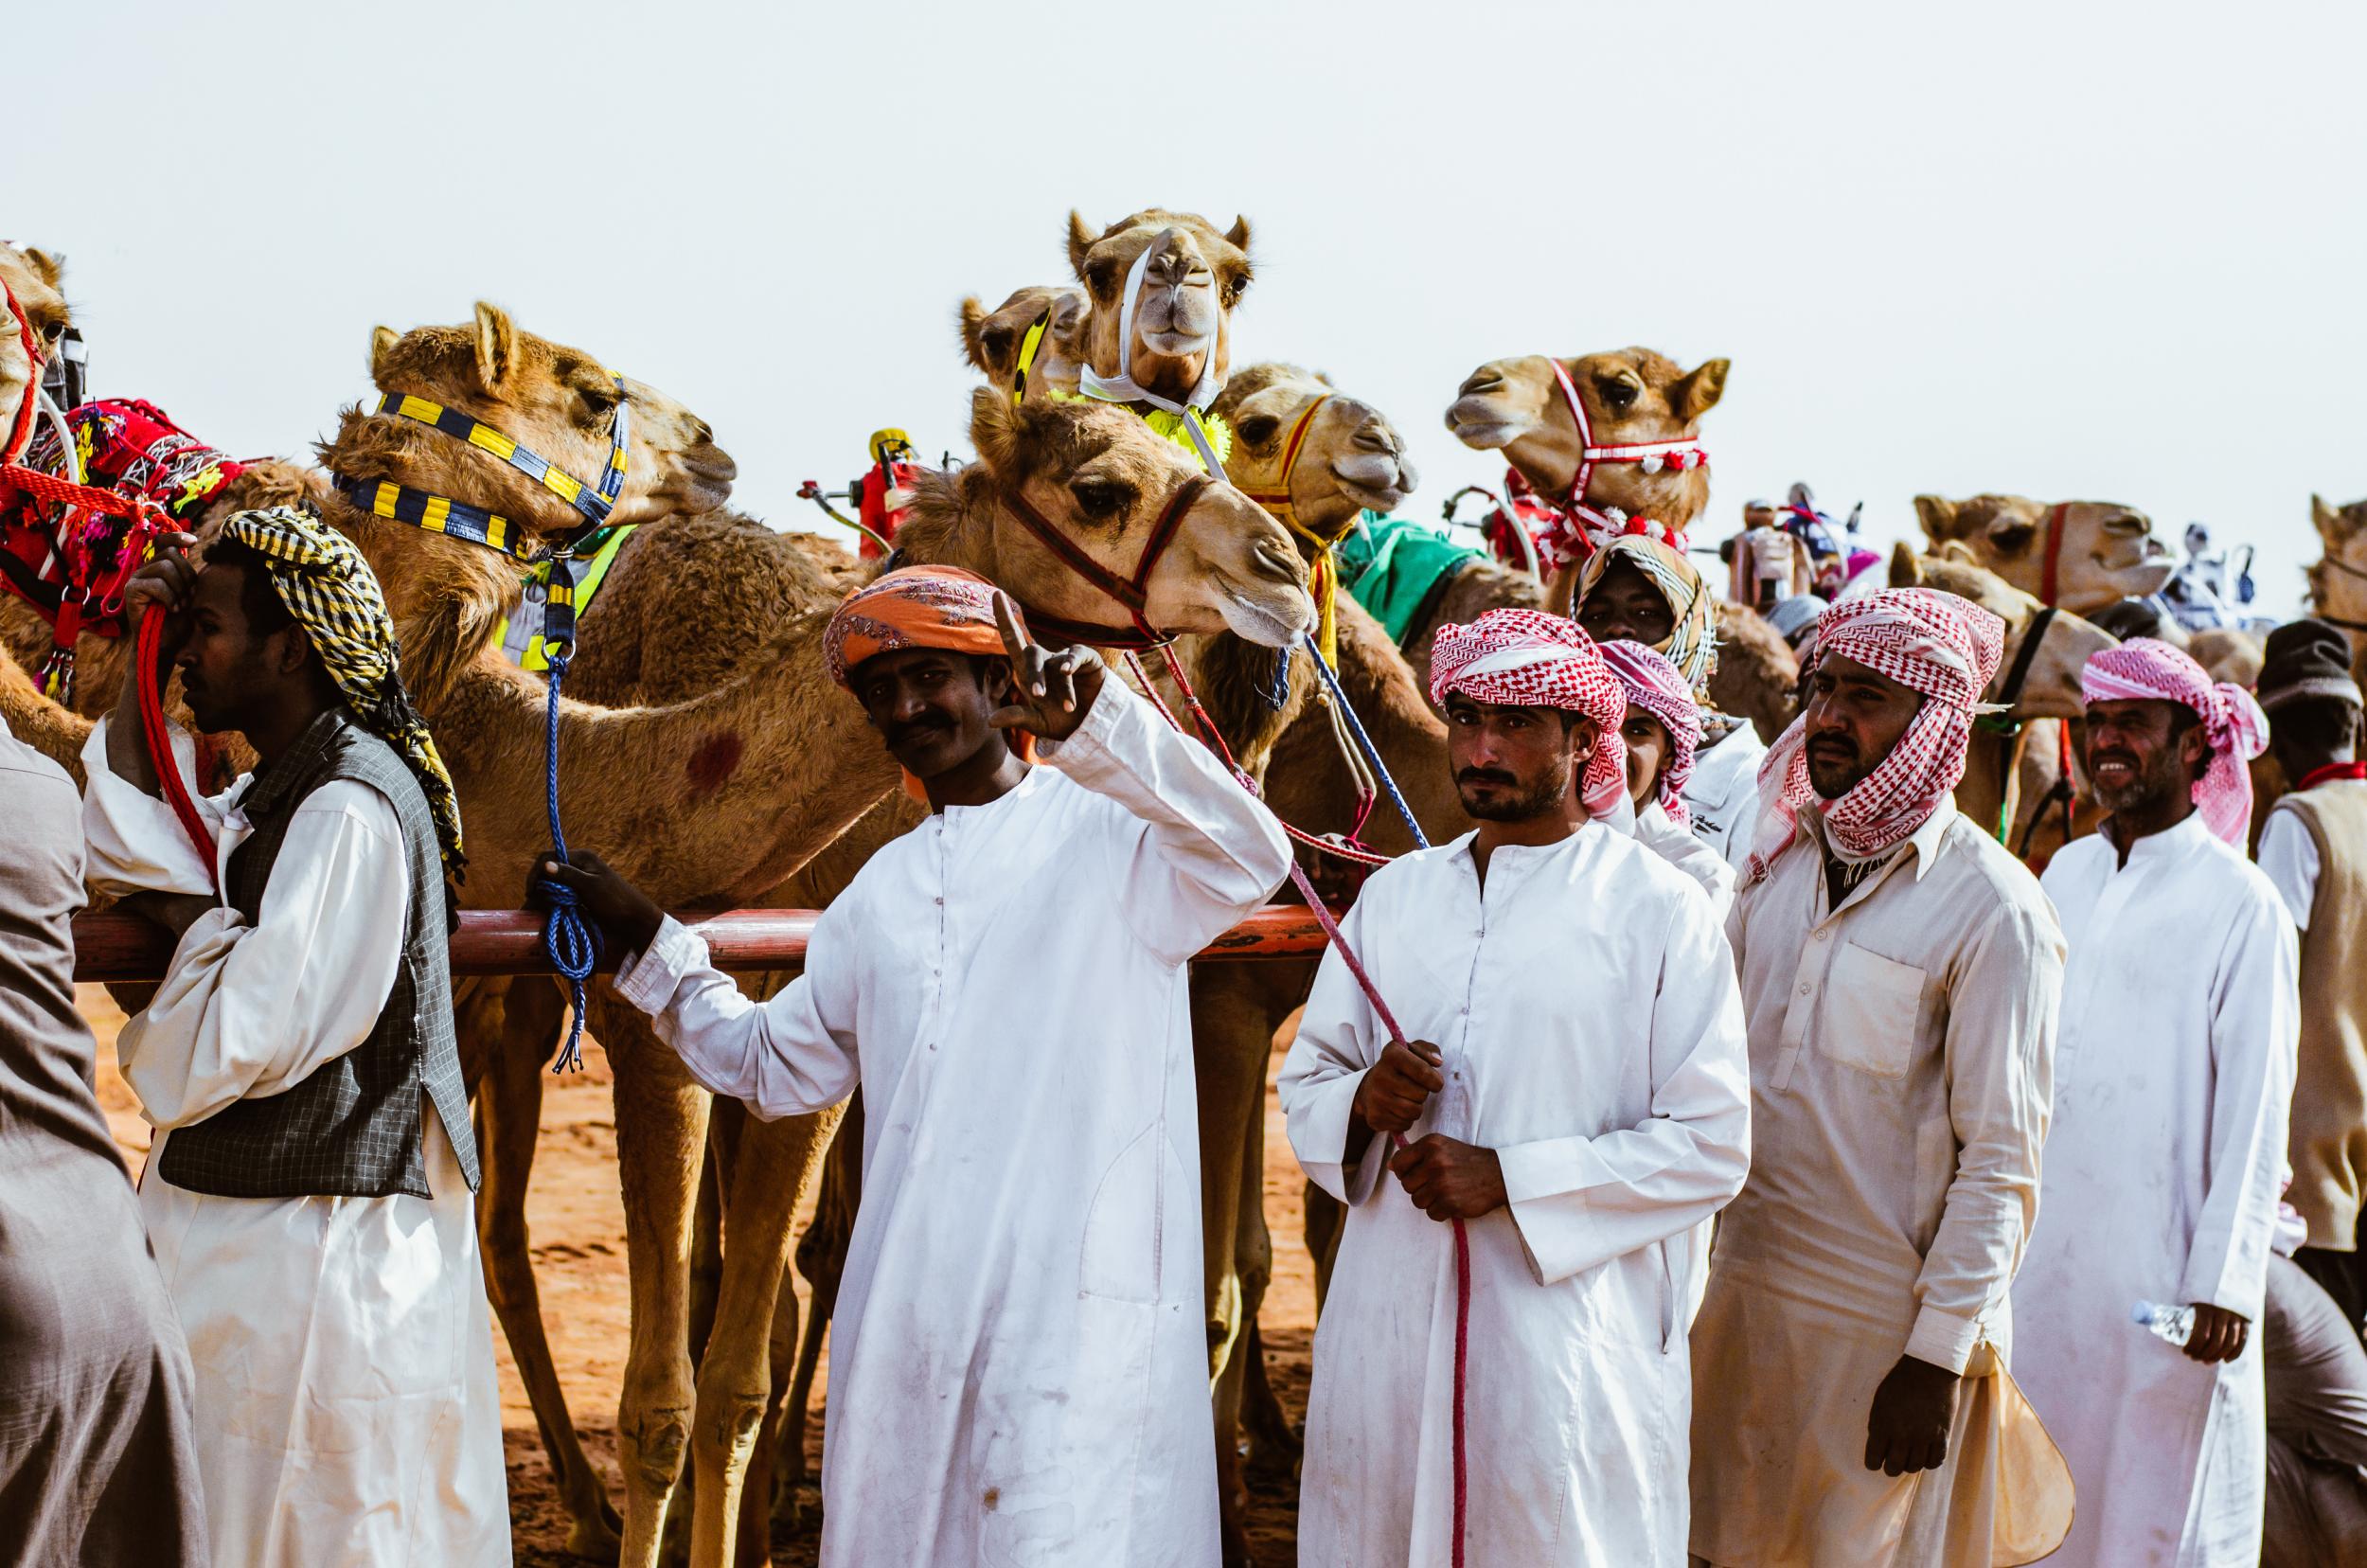 Speed humps: camel racing is a big draw